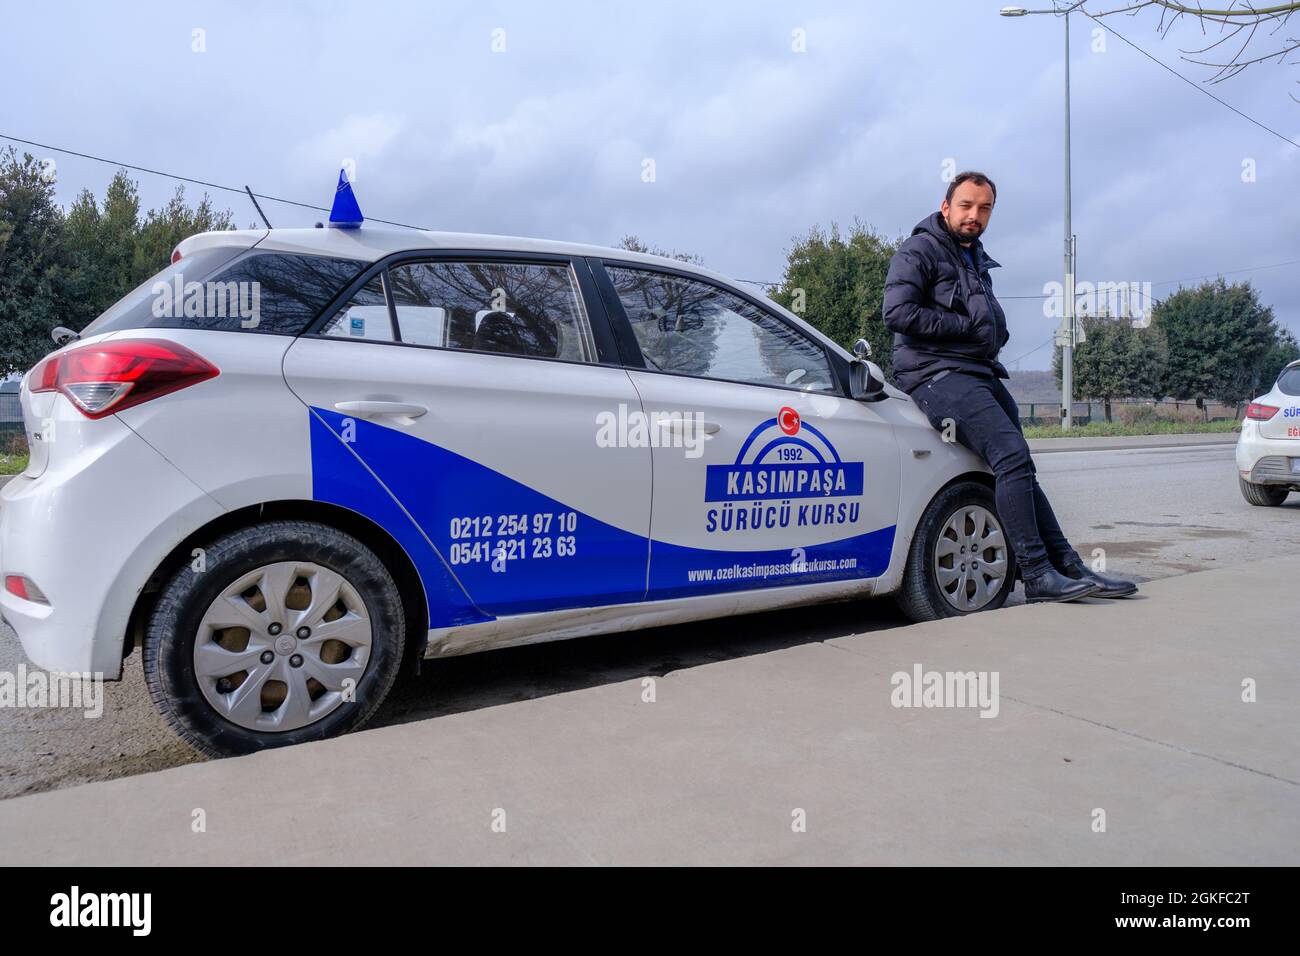 Kemerburgaz, Istanbul, Turkey - 03.19.2021: one young male instructor of driving test car in Turkey standing in front of his test car in a cloudy day. Stock Photo